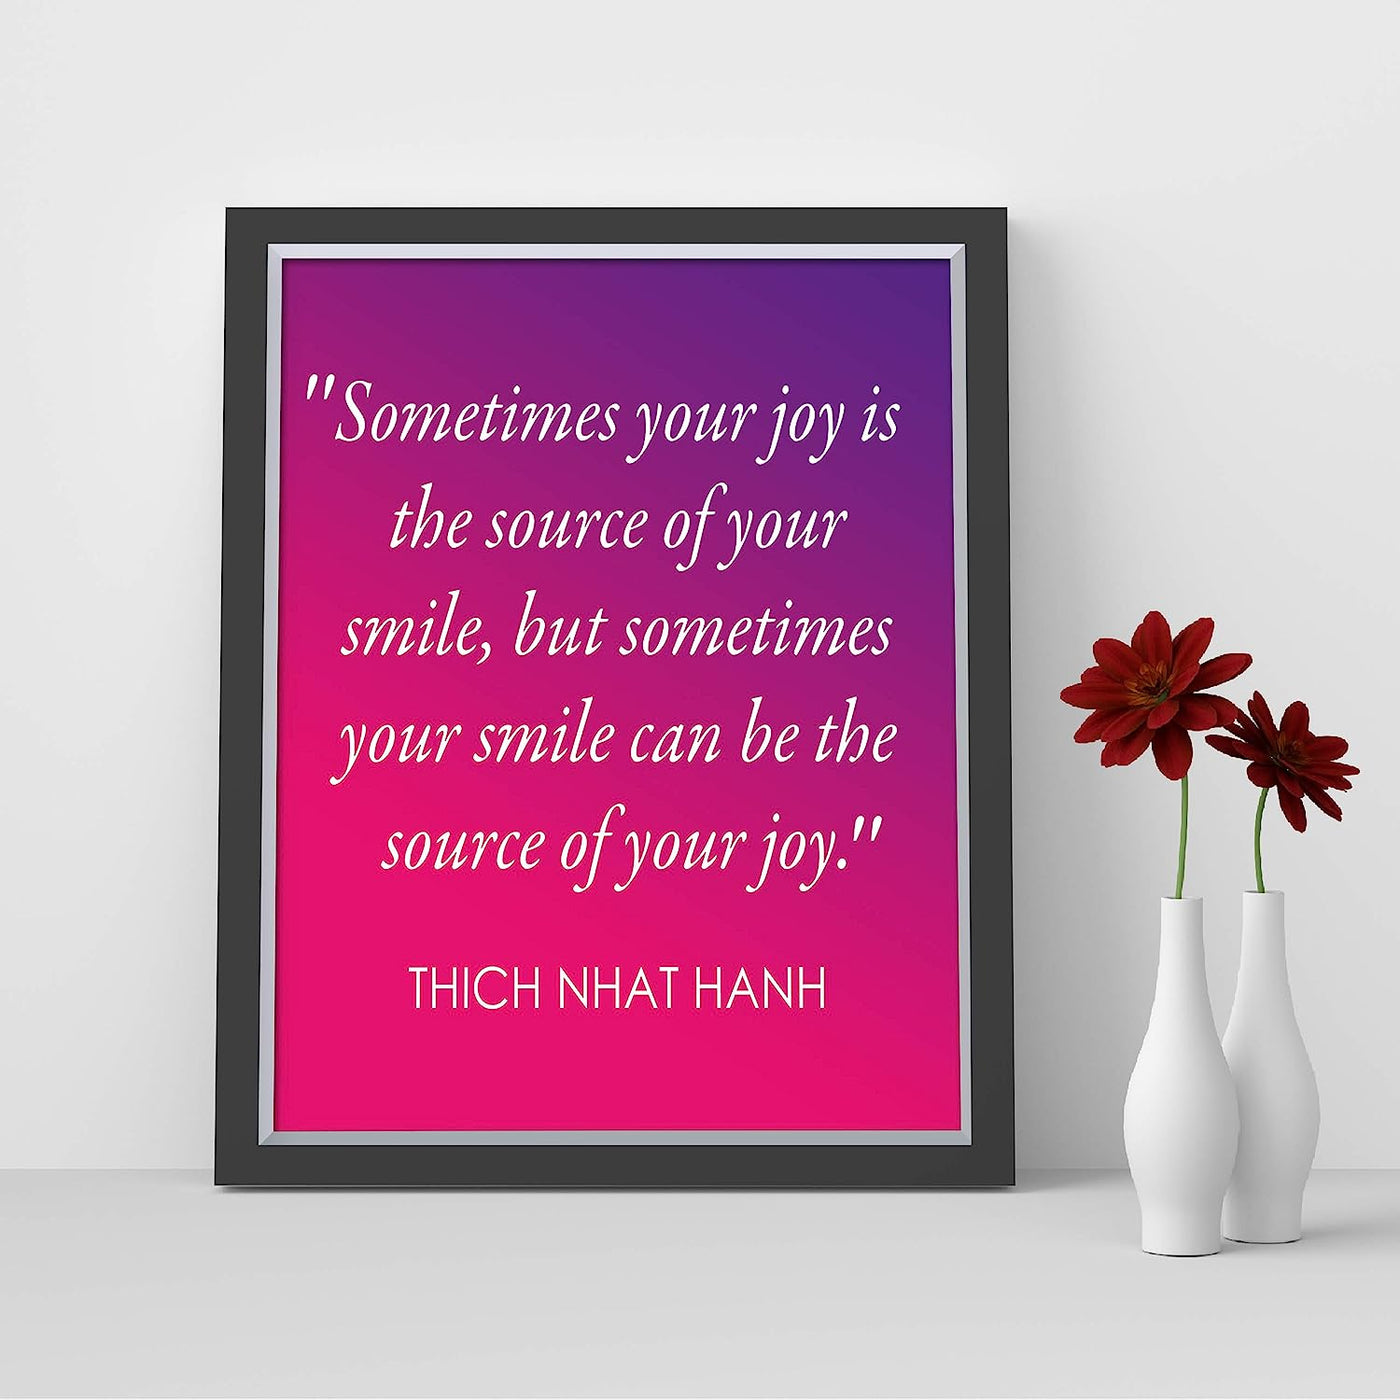 Your Smile Can Be the Source of Your Joy -Thich Nhat Hanh Mindfulness Quotes -8 x 10" Spiritual Wall Art Print-Ready to Frame. Home-Office-Studio-Meditation-Zen Decor. Great Life Lesson-Smile!